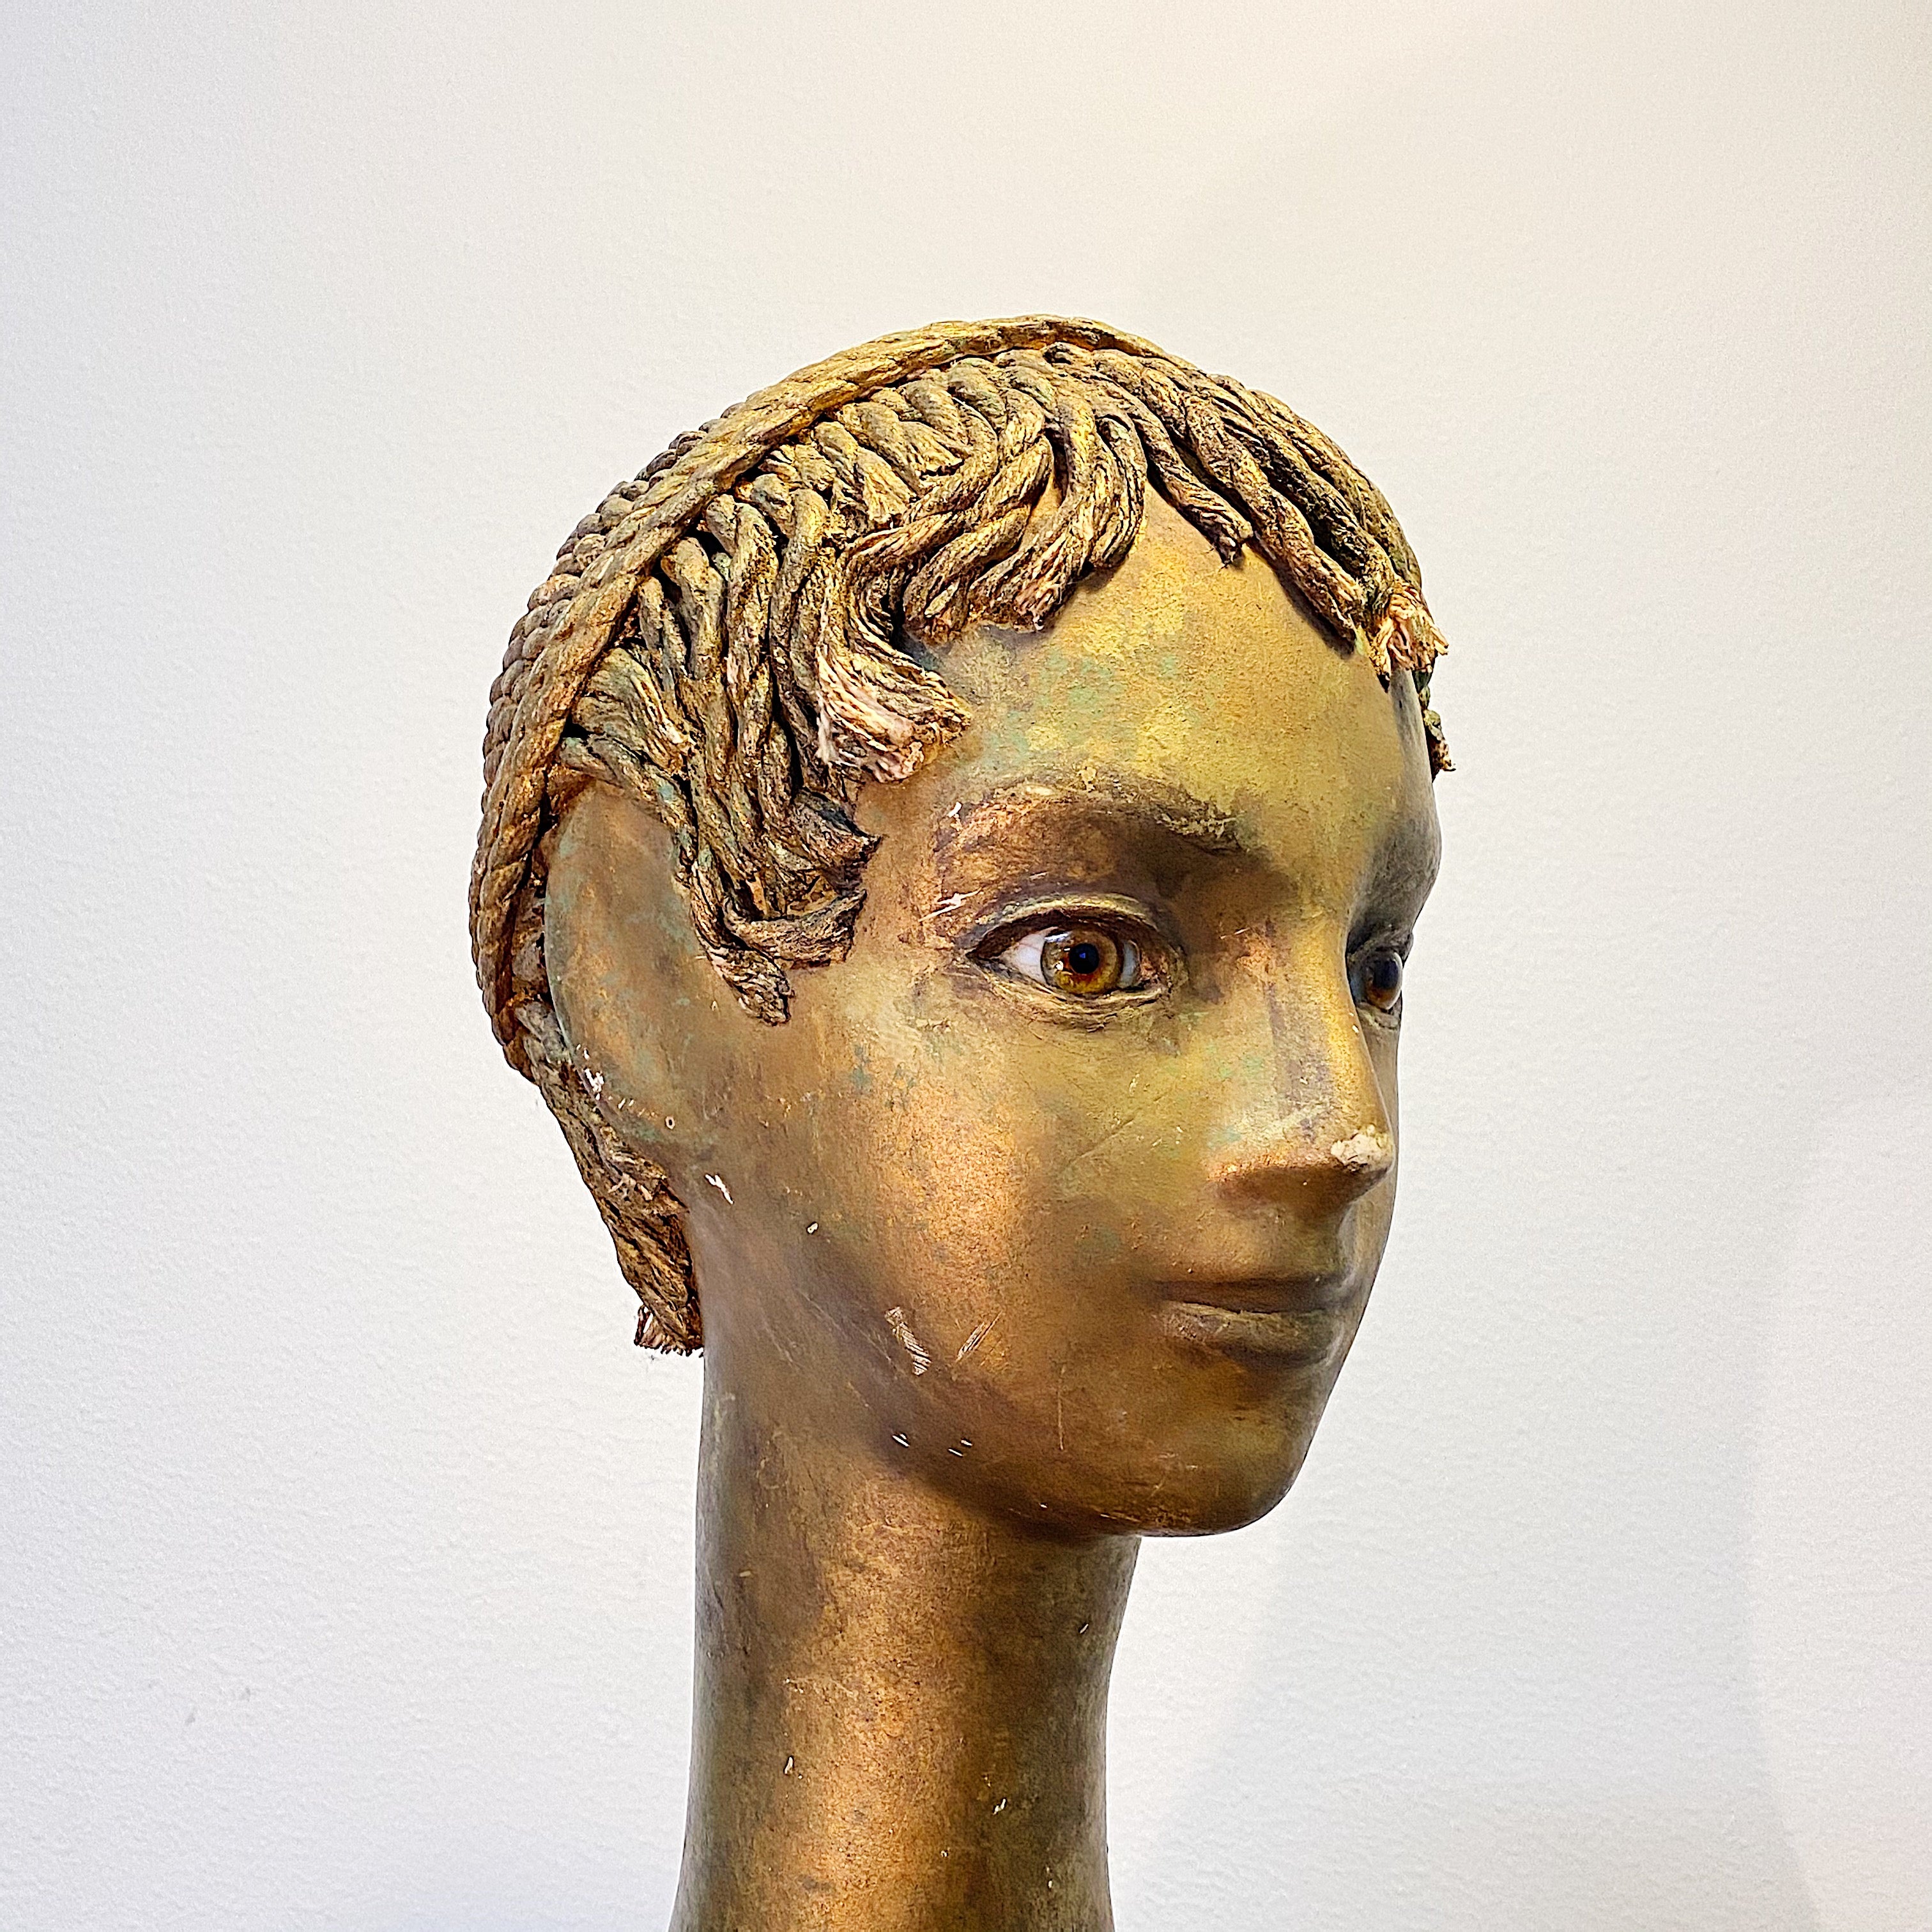 Head of Antique Mannequin Head Store Display of Exotic Woman - Rare 1920s European Sculpture - Glass Eyes - Art Deco Design - Accent Piece